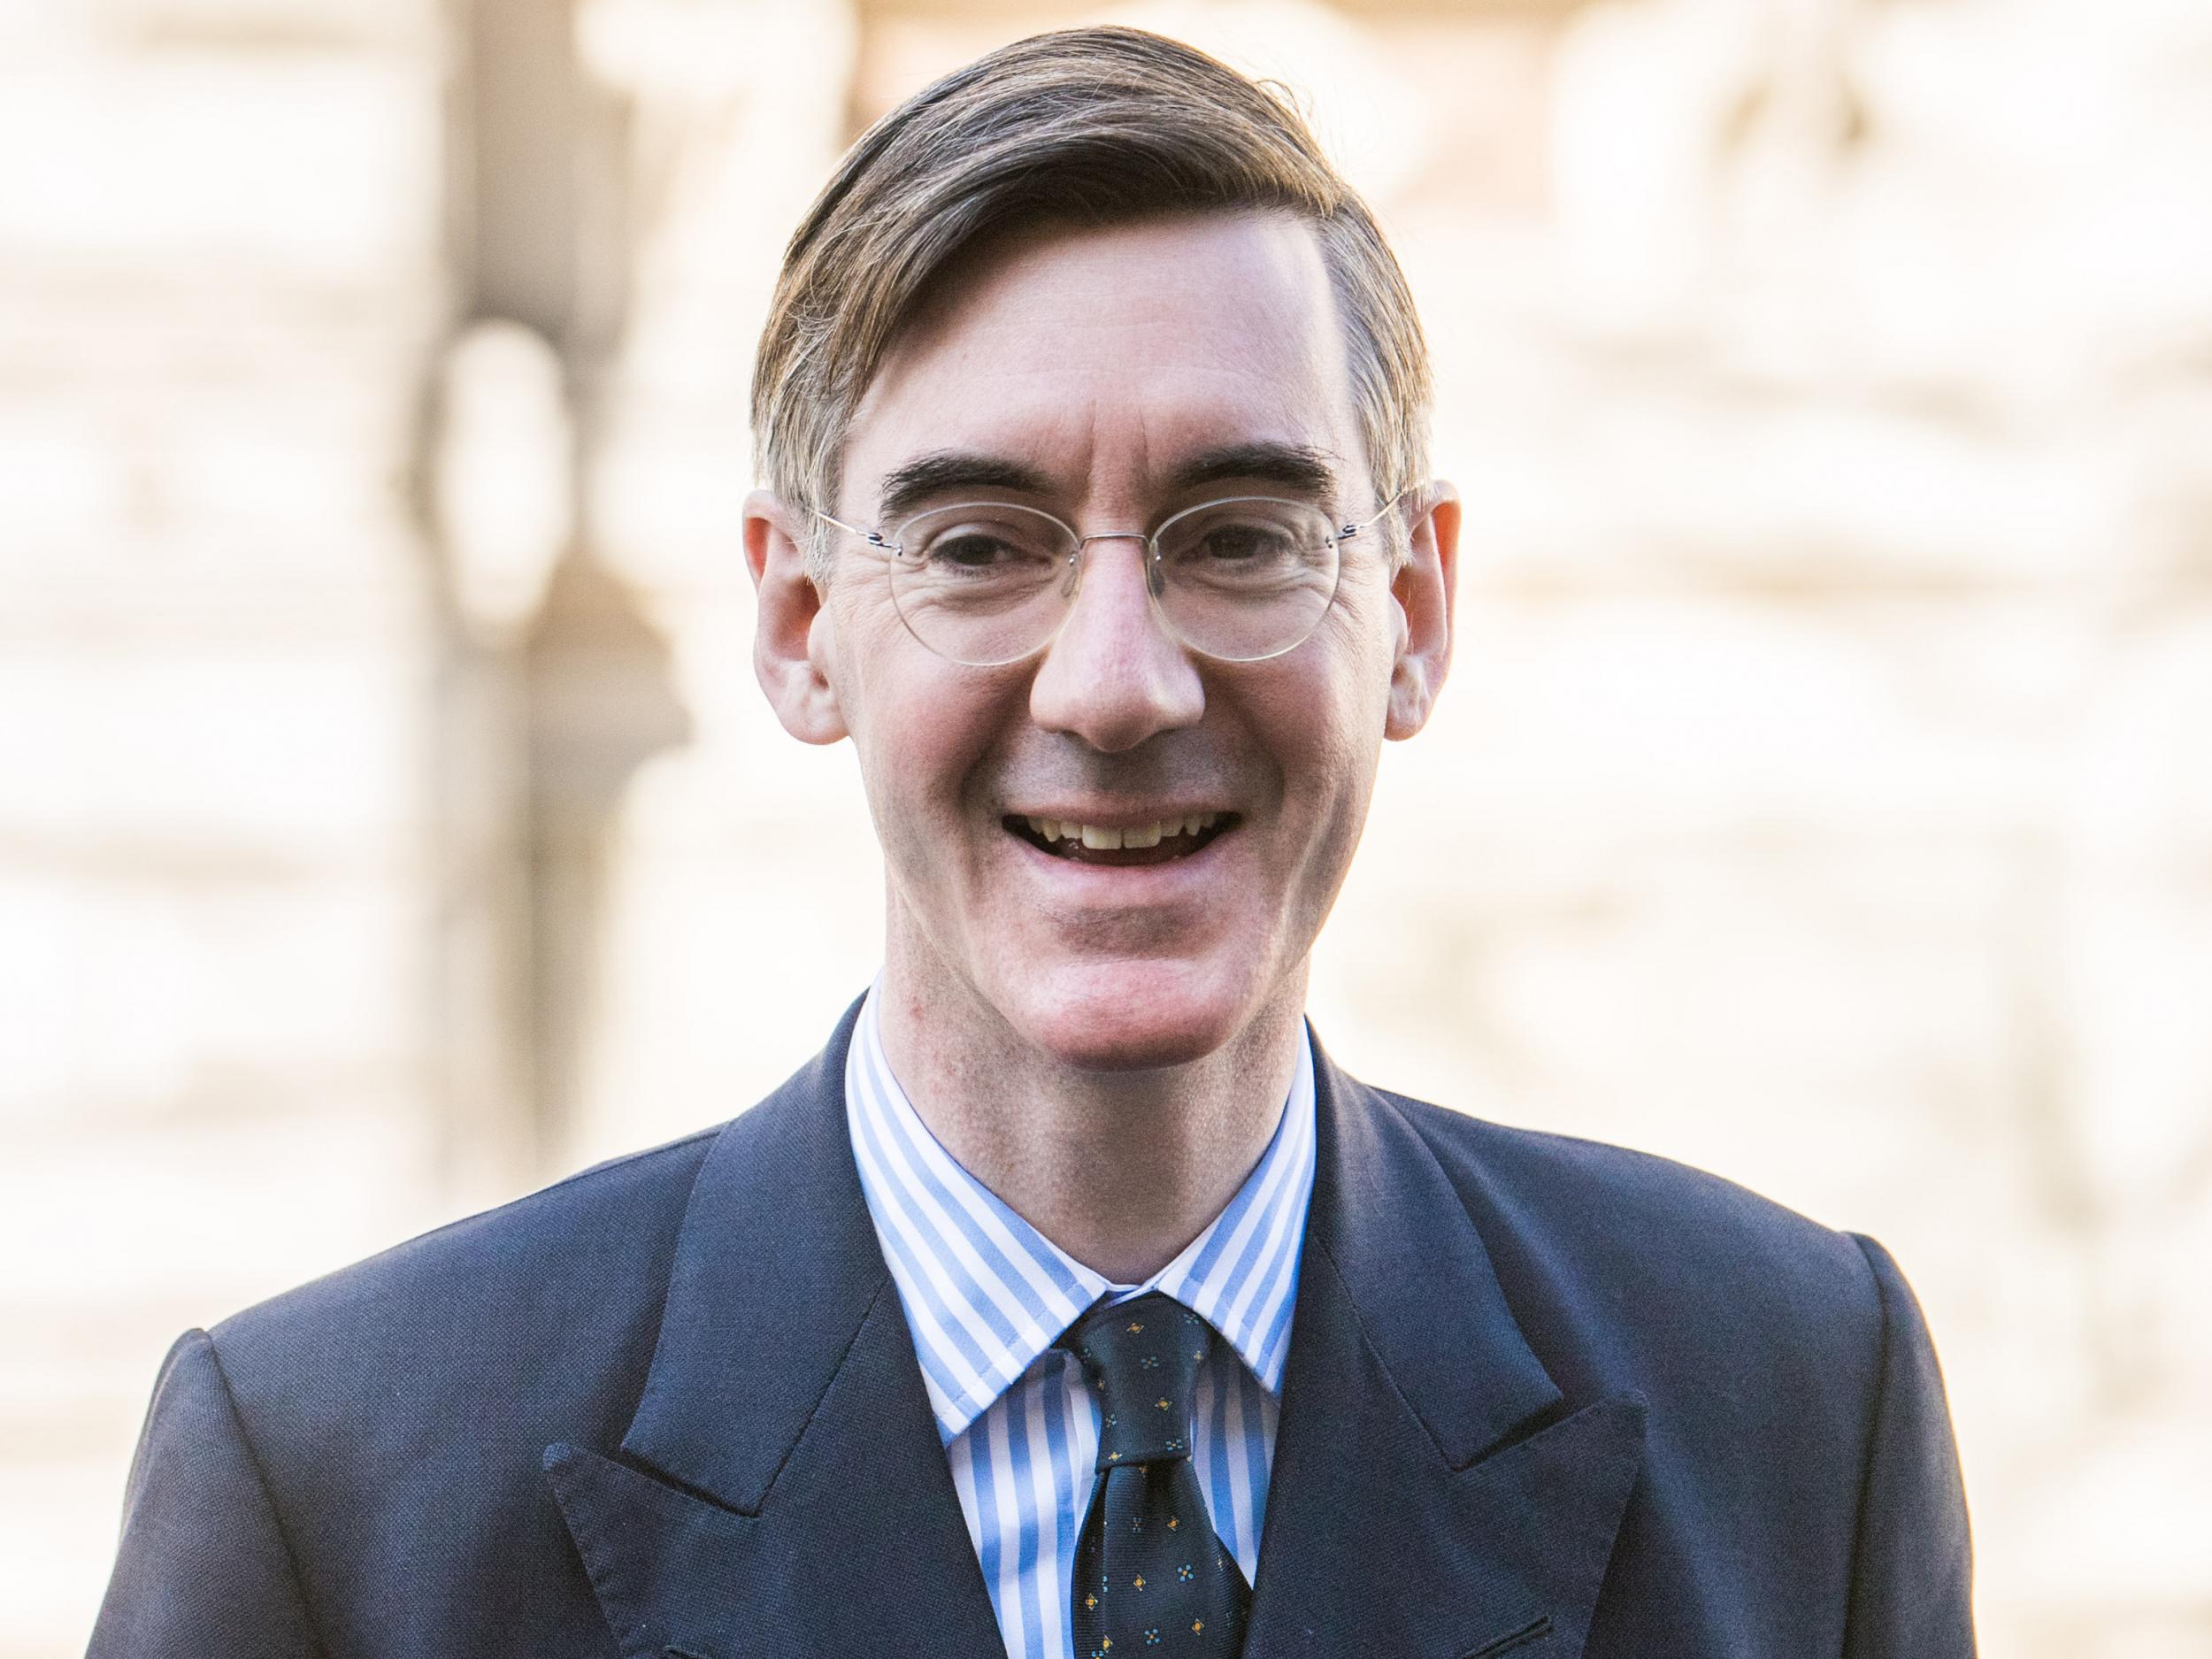 Mr Rees-Mogg played down his prospects of becoming prime minister – but, notably, did not rule it out